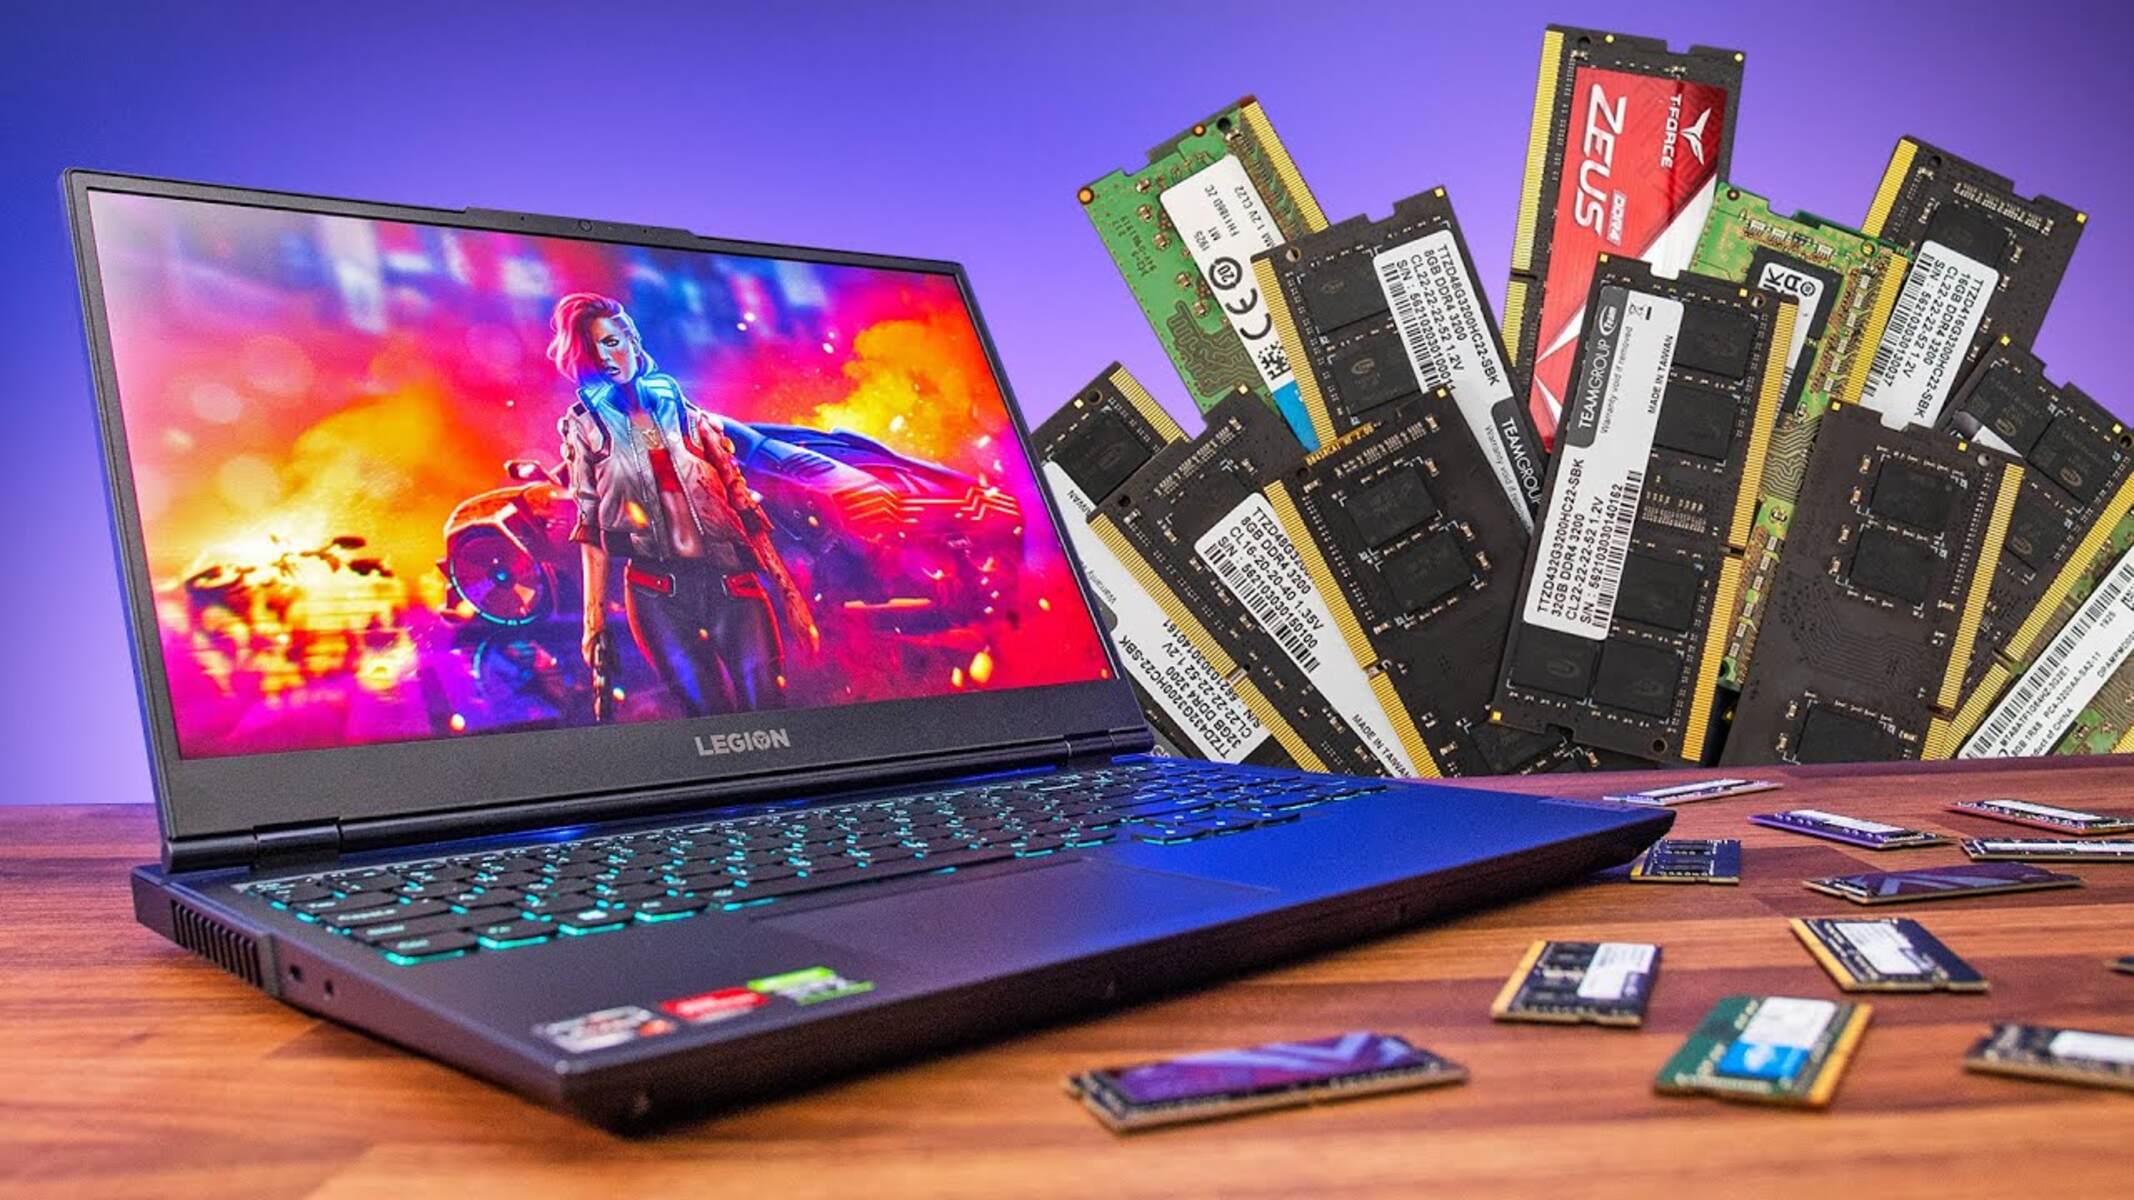 How Much RAM Should A Gaming Laptop Have?